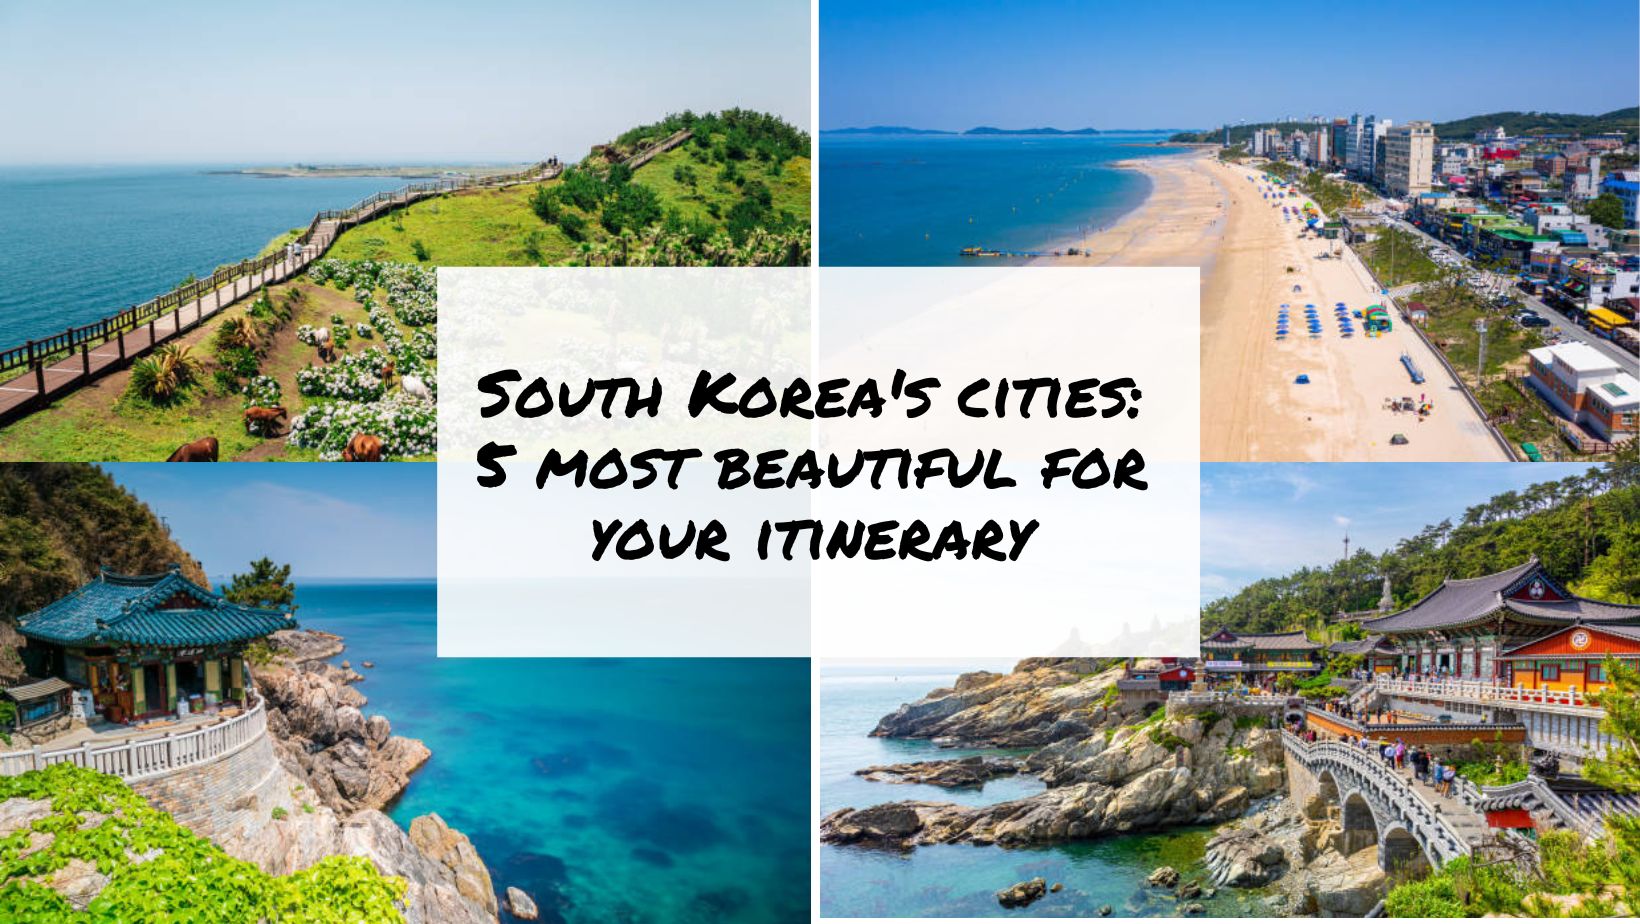 South Korea's cities 5 most beautiful for your itinerary